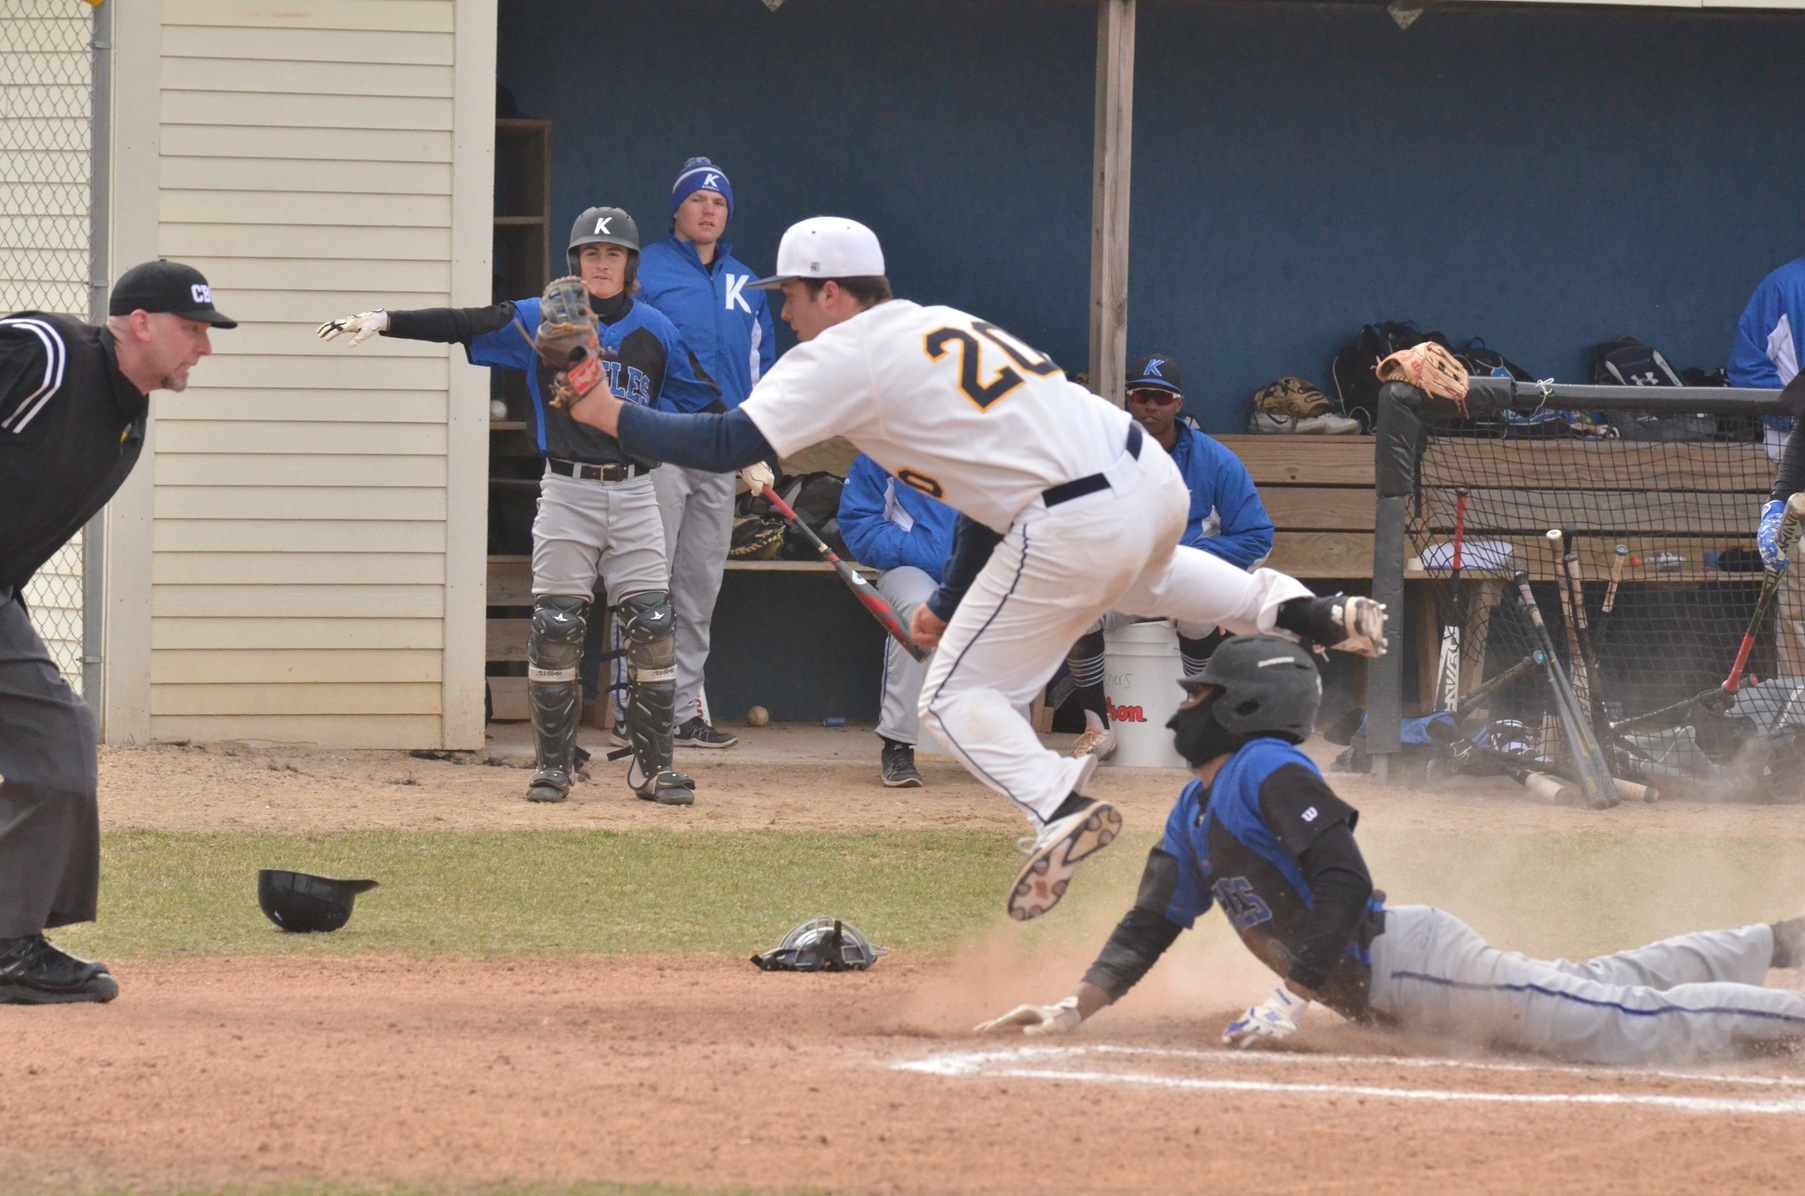 JJ Stephens tags out a runner at home in Wednesday's nightcap vs. Kirkwood